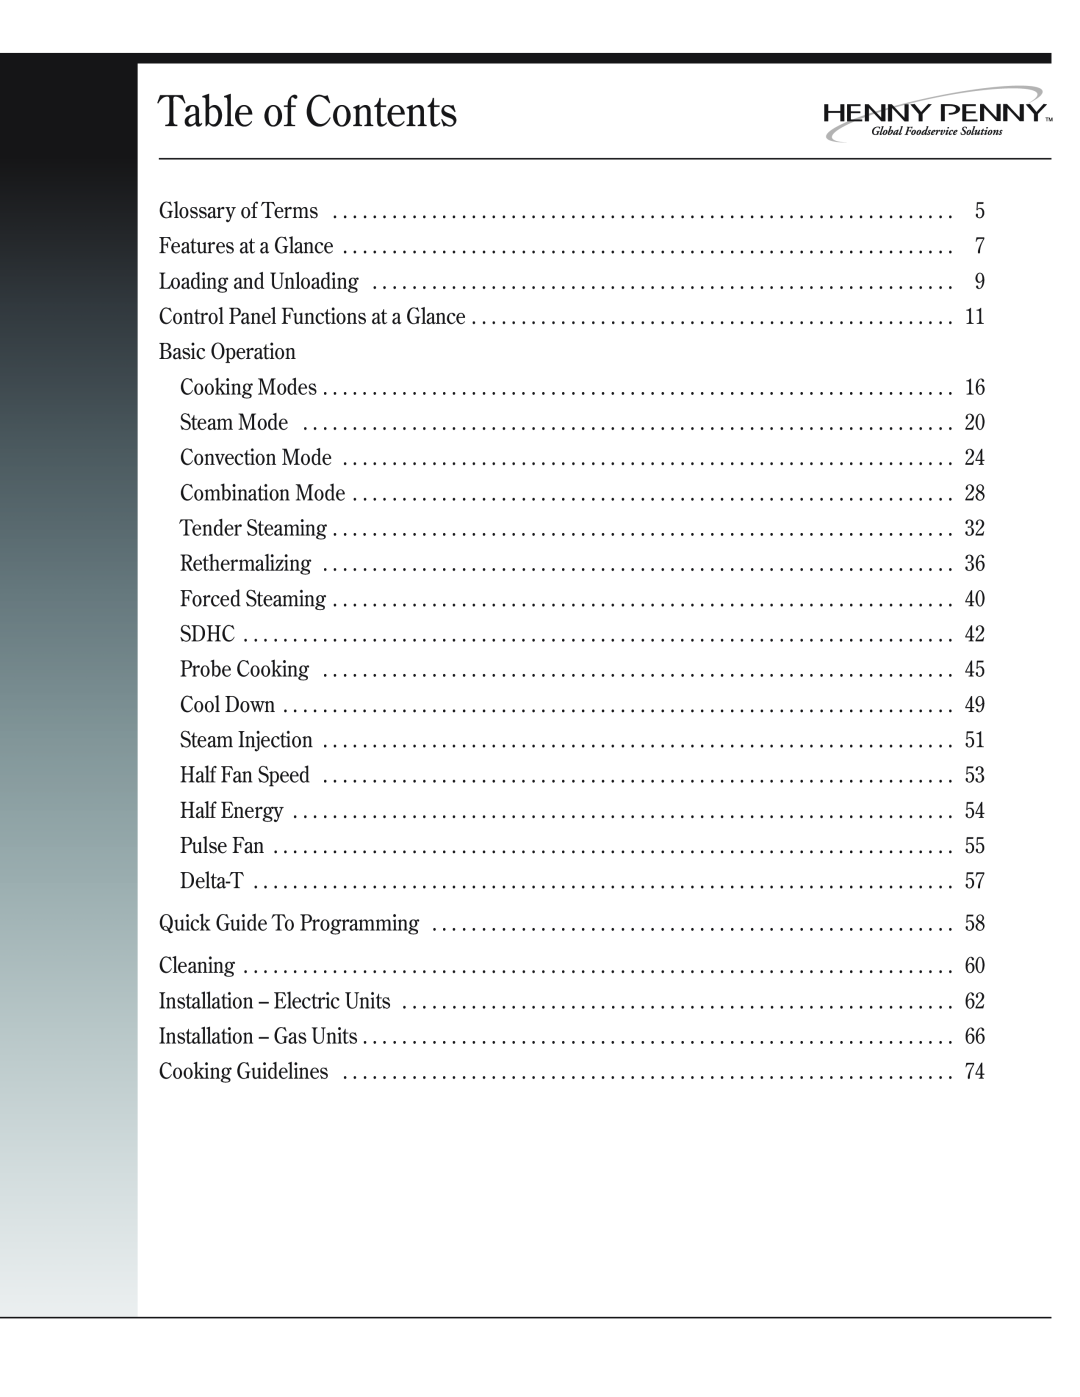 Henny Penny CSG manual Table of Contents 